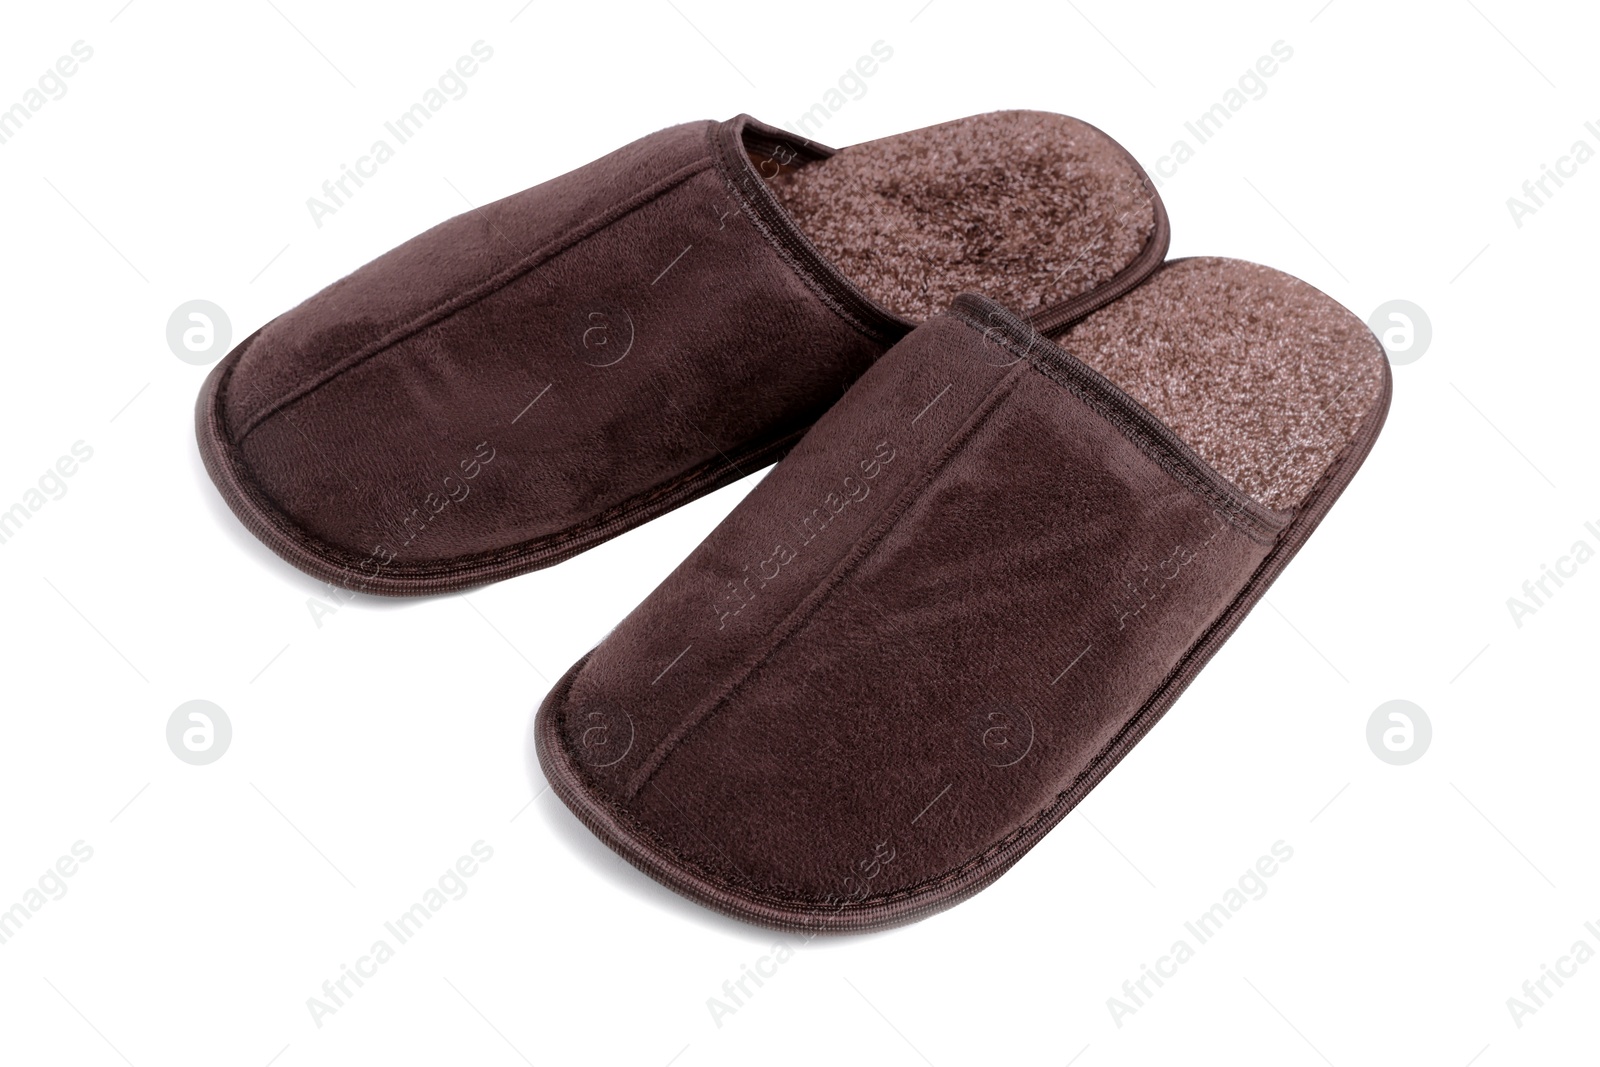 Photo of Pair of soft brown slippers isolated on white